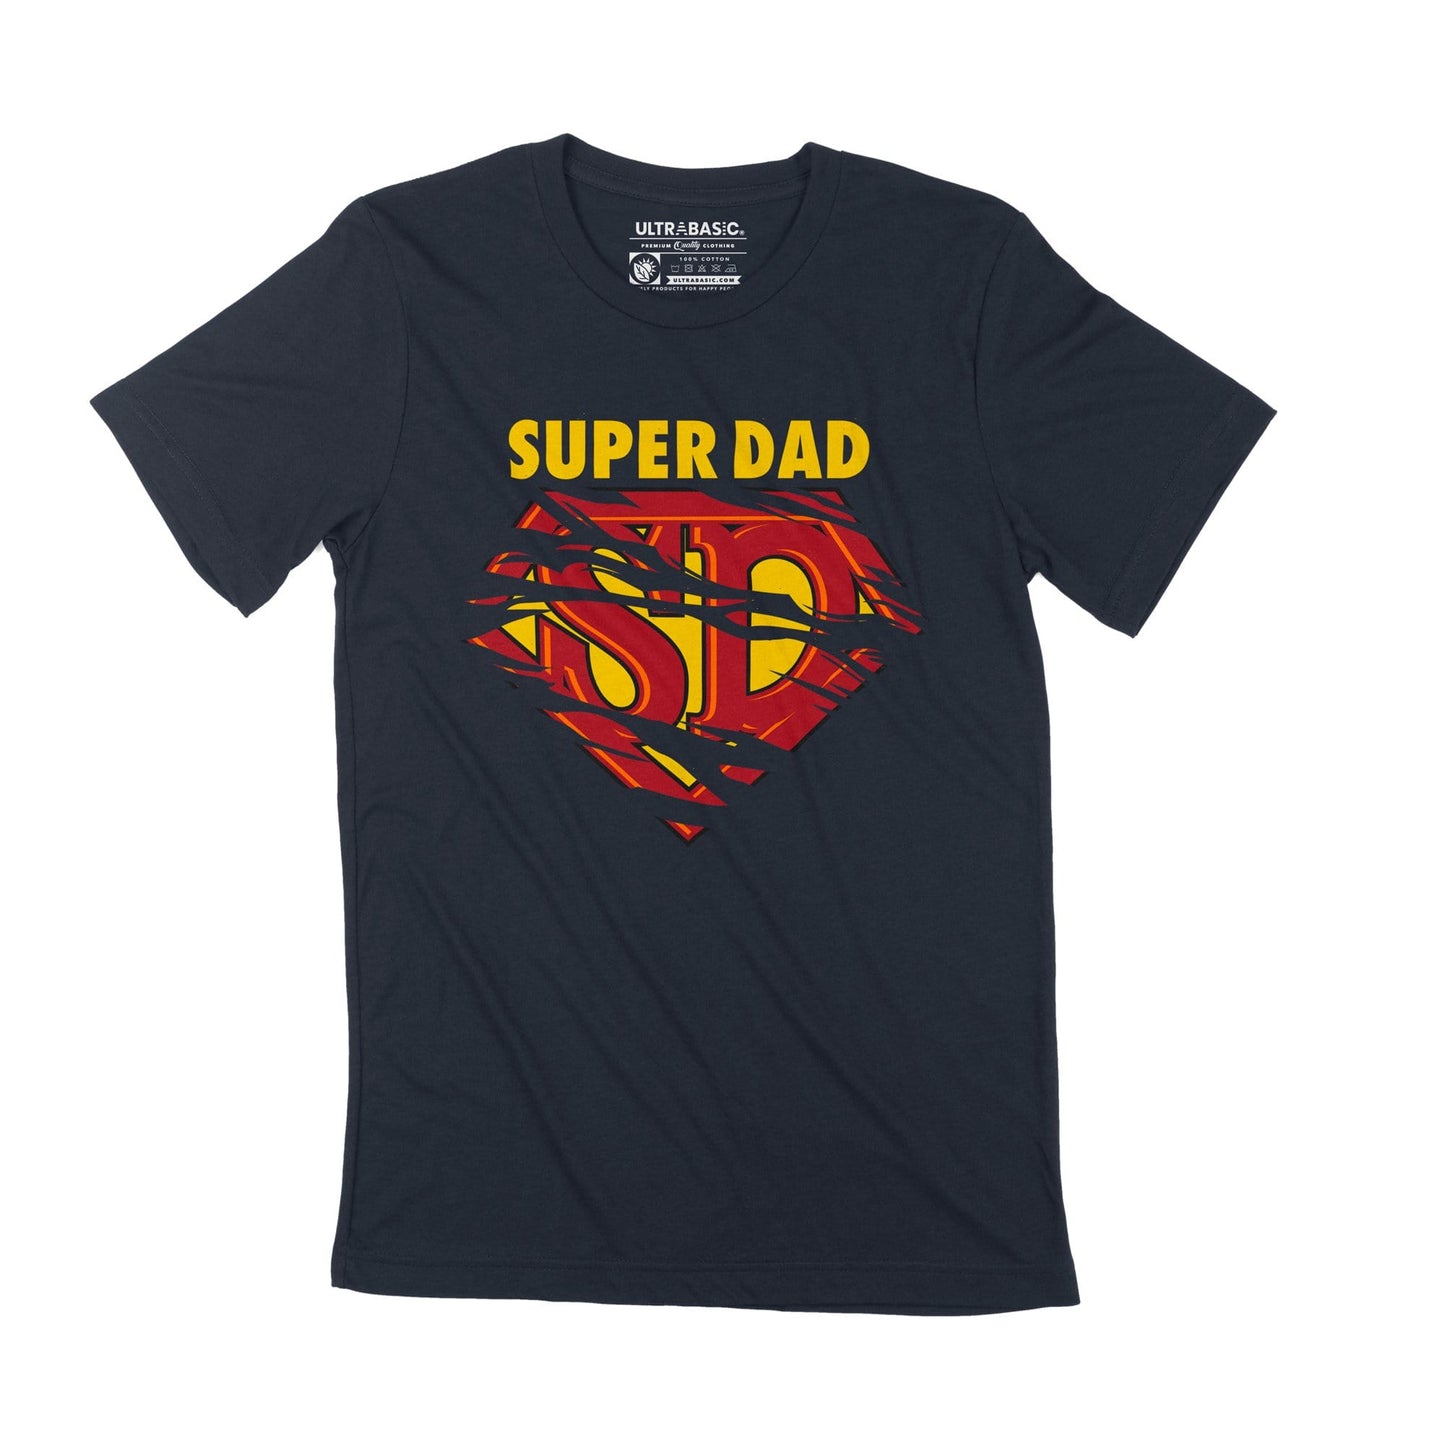 ULTRABASIC Men's T-Shirt Super Dad Father's Day Superhero Vintage Casual Fabulous Gift